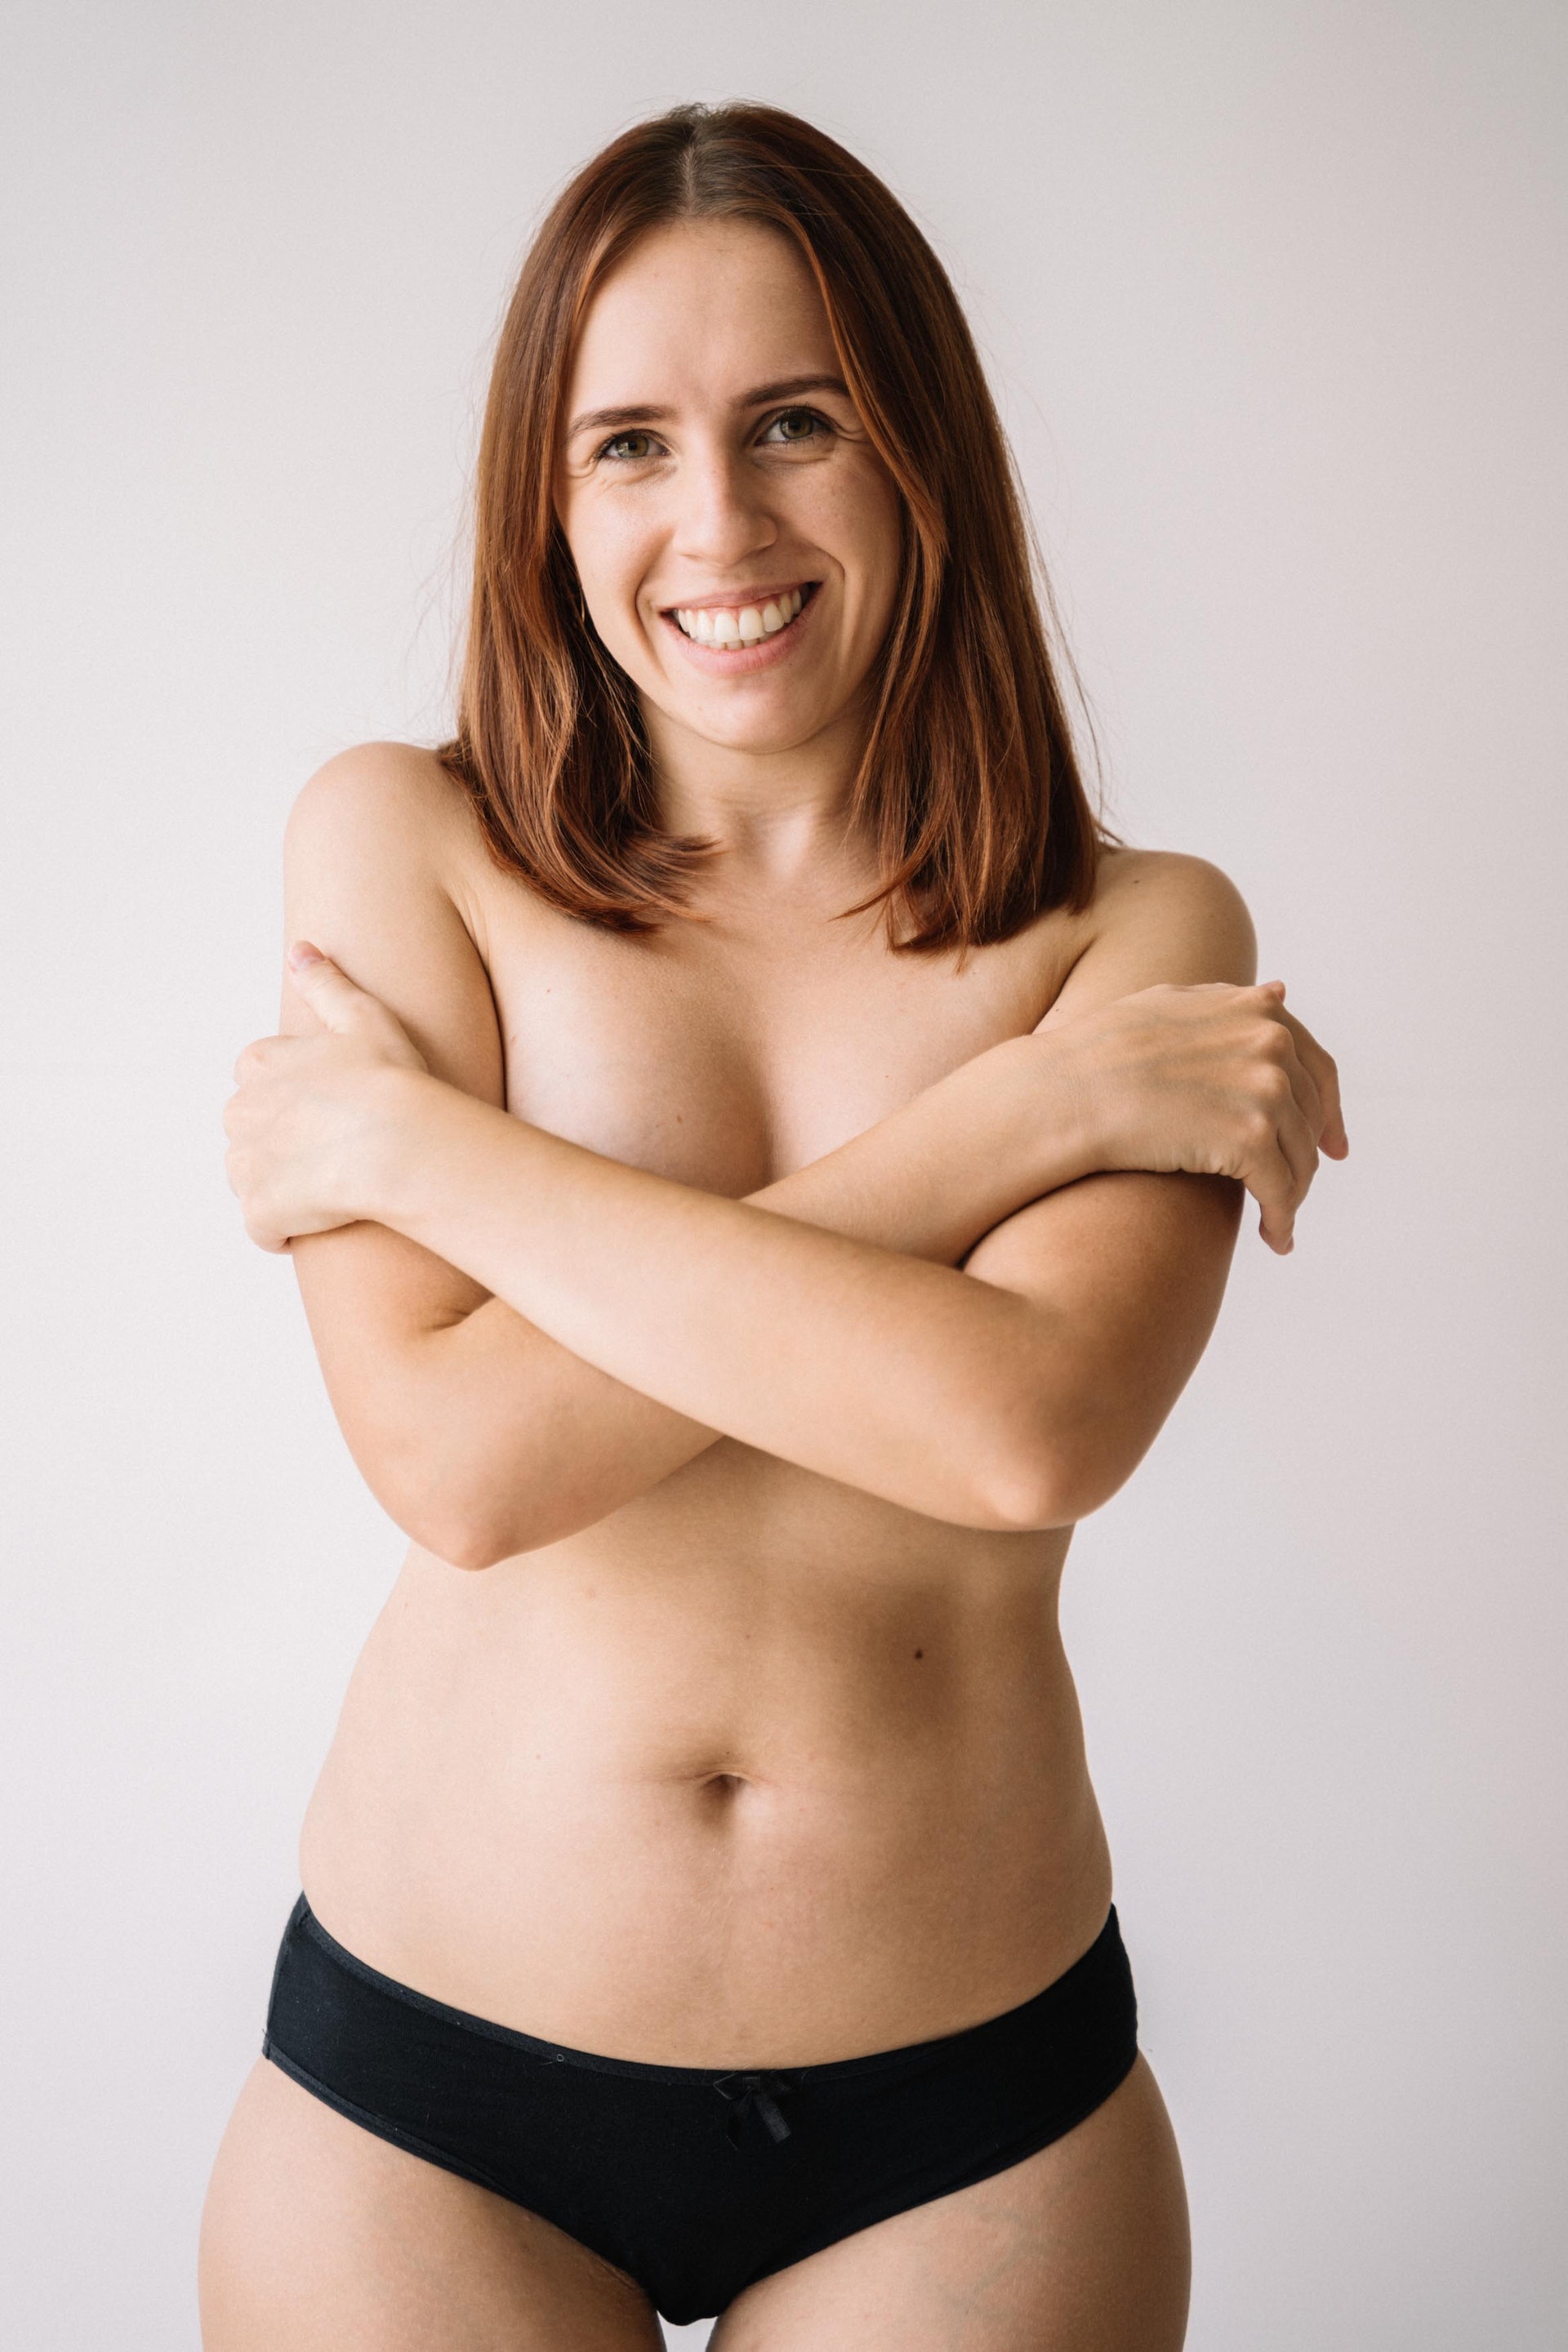 What Will My Breasts Look Like After a Breast Lift? - Atlanta